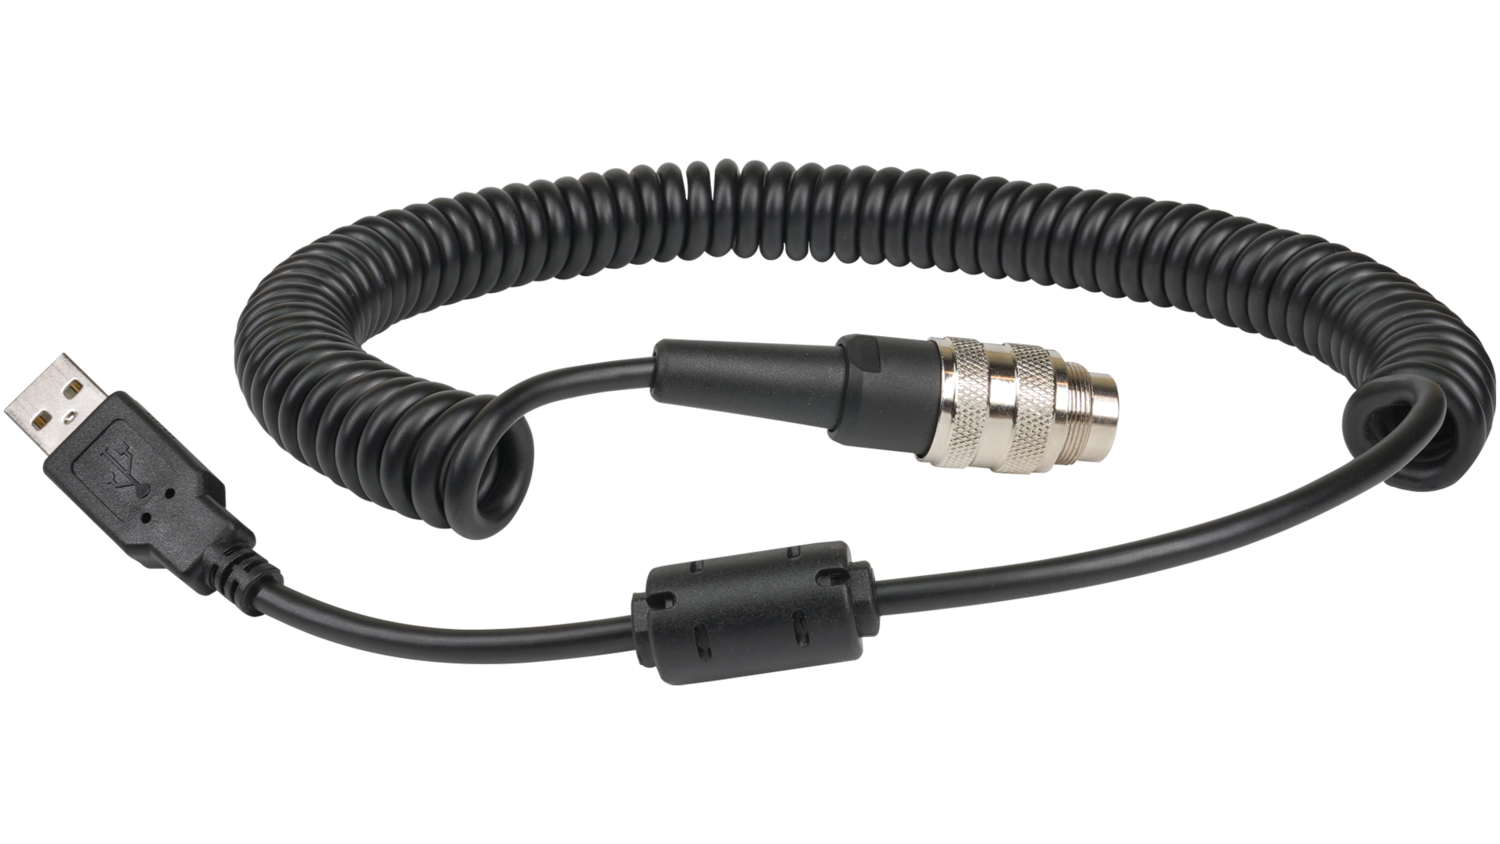 GSI "Spec 3" Coiled USB Cable